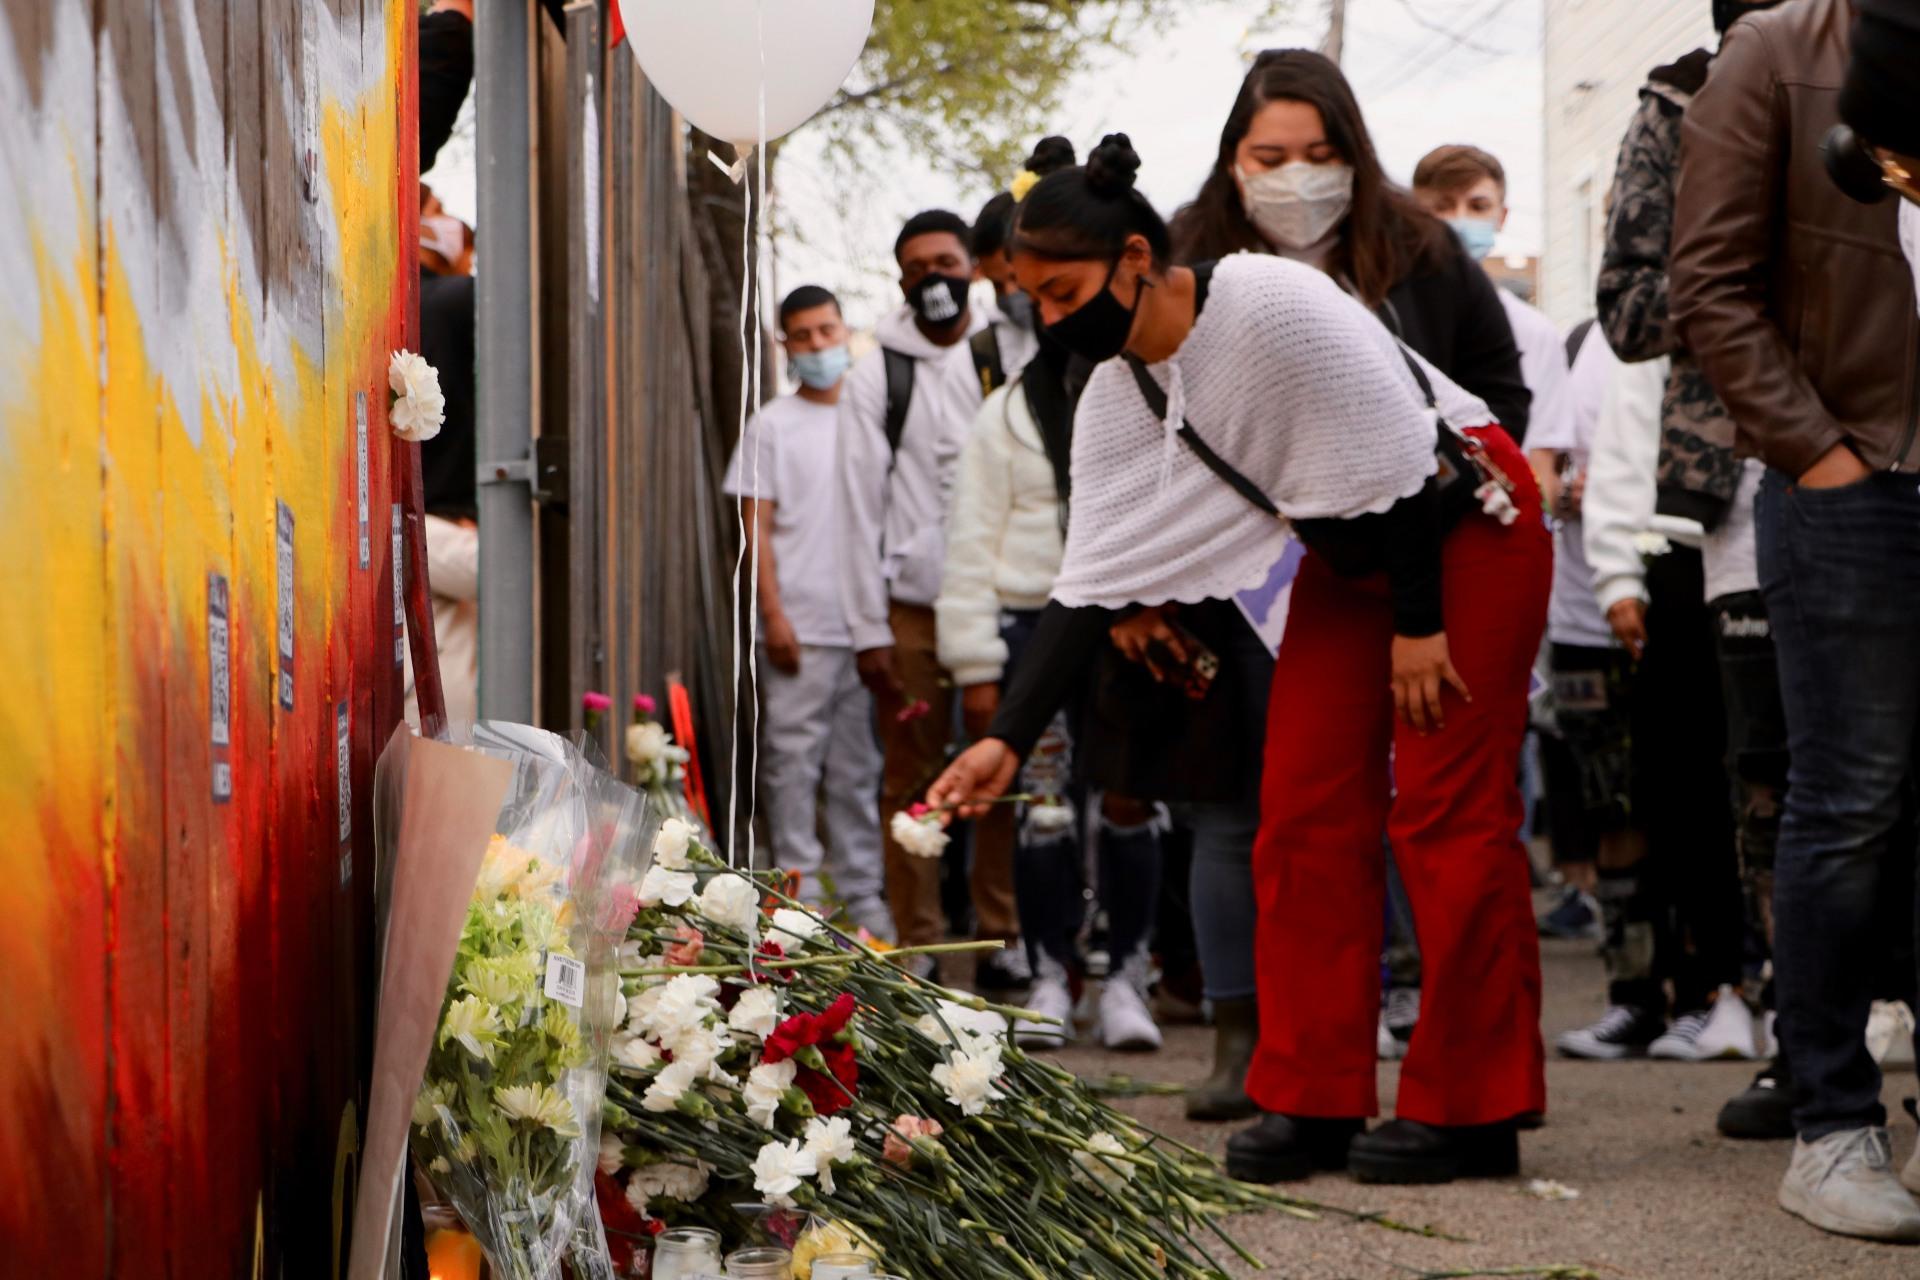 An attendee of the April 18, 2021 peace walk lays a flower at a memorial for 13-year-old Adam Toledo in Chicago’s Little Village neighborhood. Toledo was fatally shot by a police officer in this location on March 29, 2021. (Evan Garcia / WTTW News)